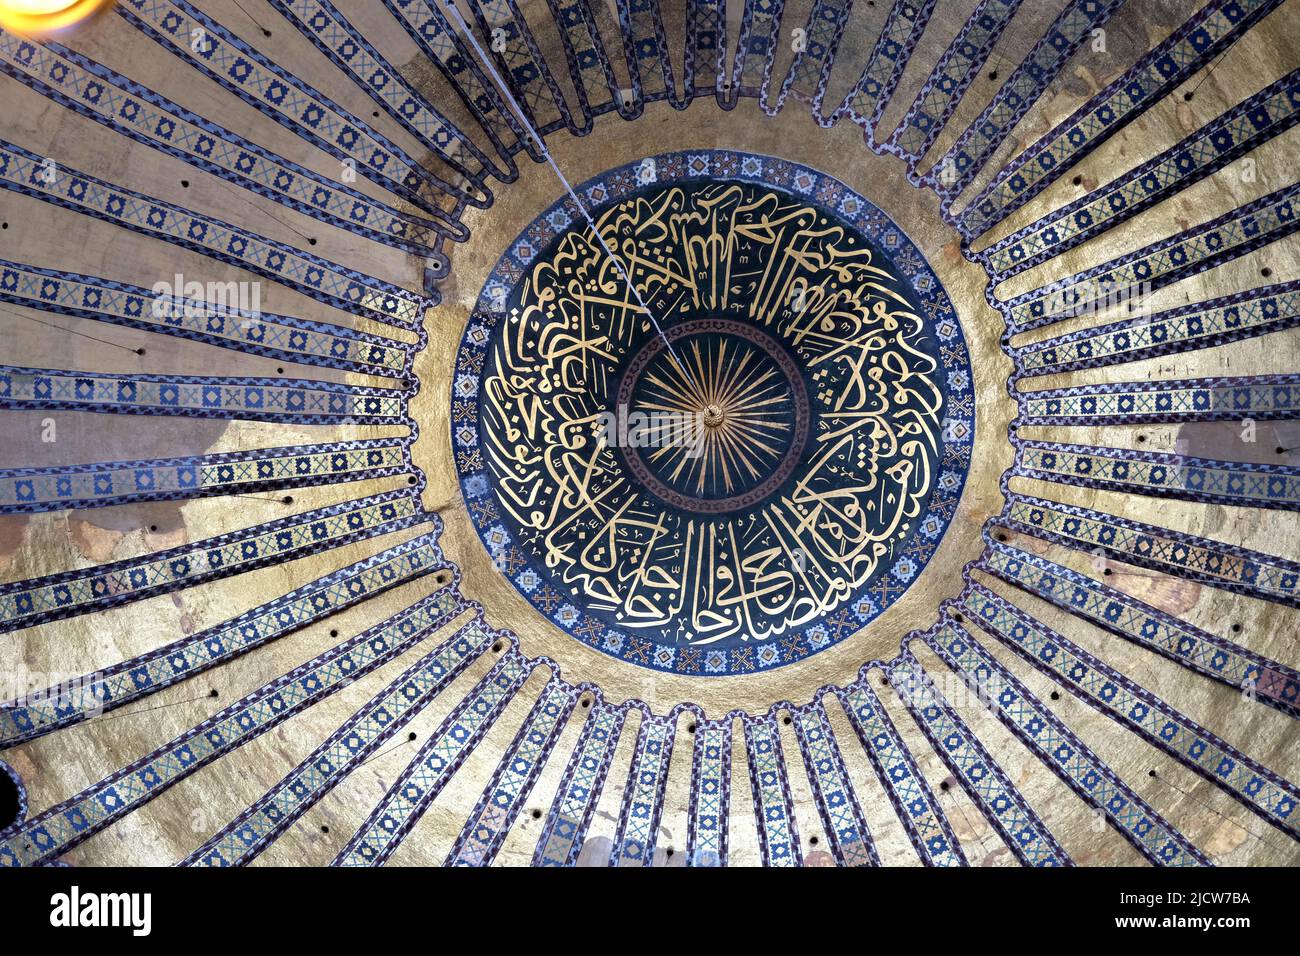 Interior of the dome of the Hagia Sophia Mosque in Istanbul Turkey Stock Photo